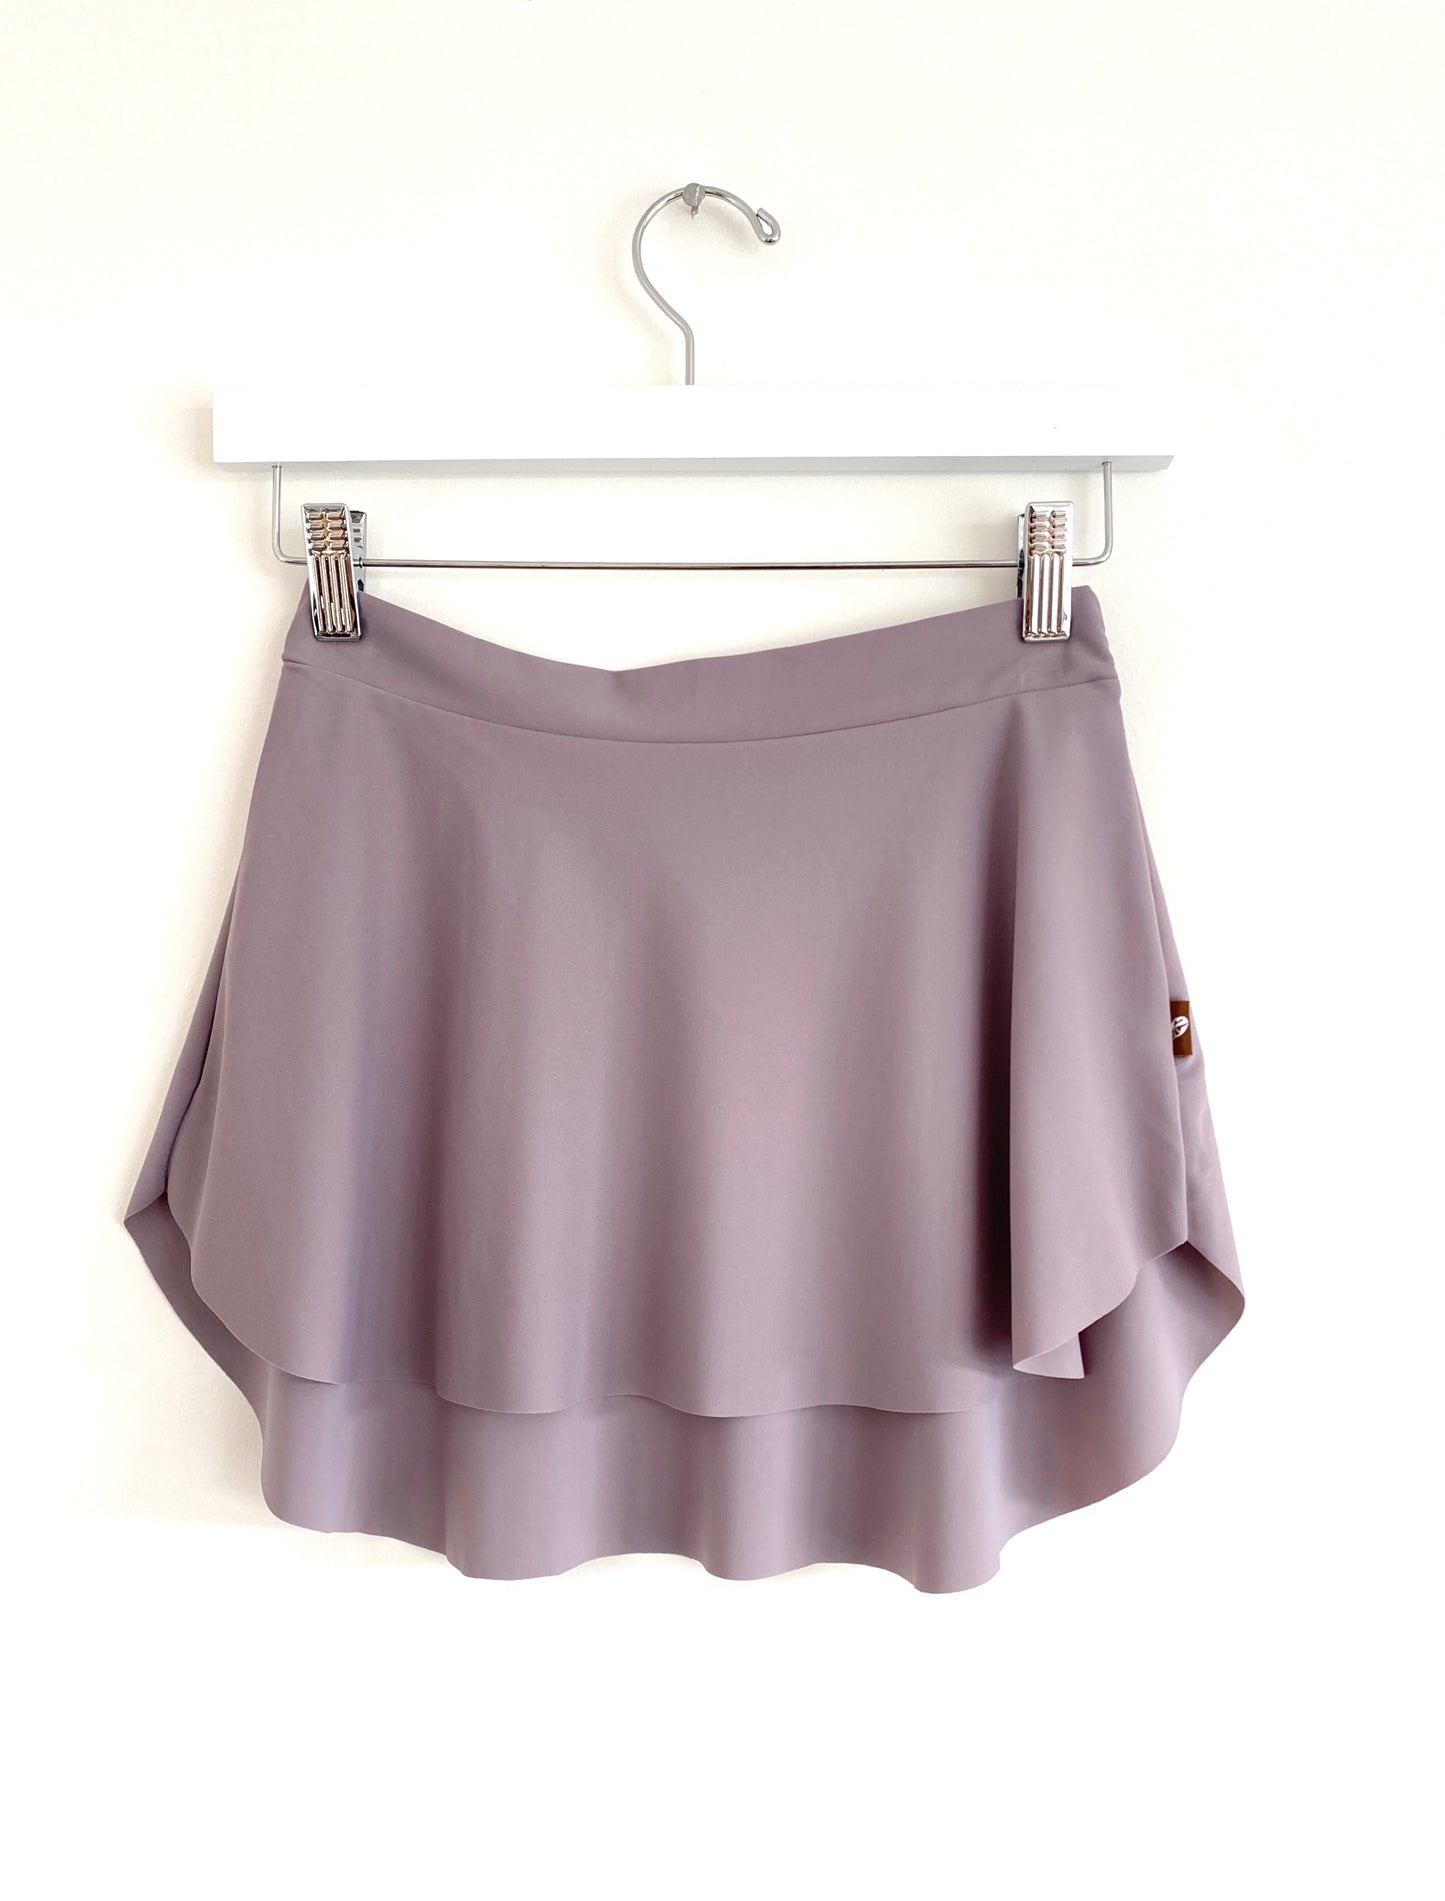 SAB ballet skirt in dusky lilac from The Collective Dancewear 